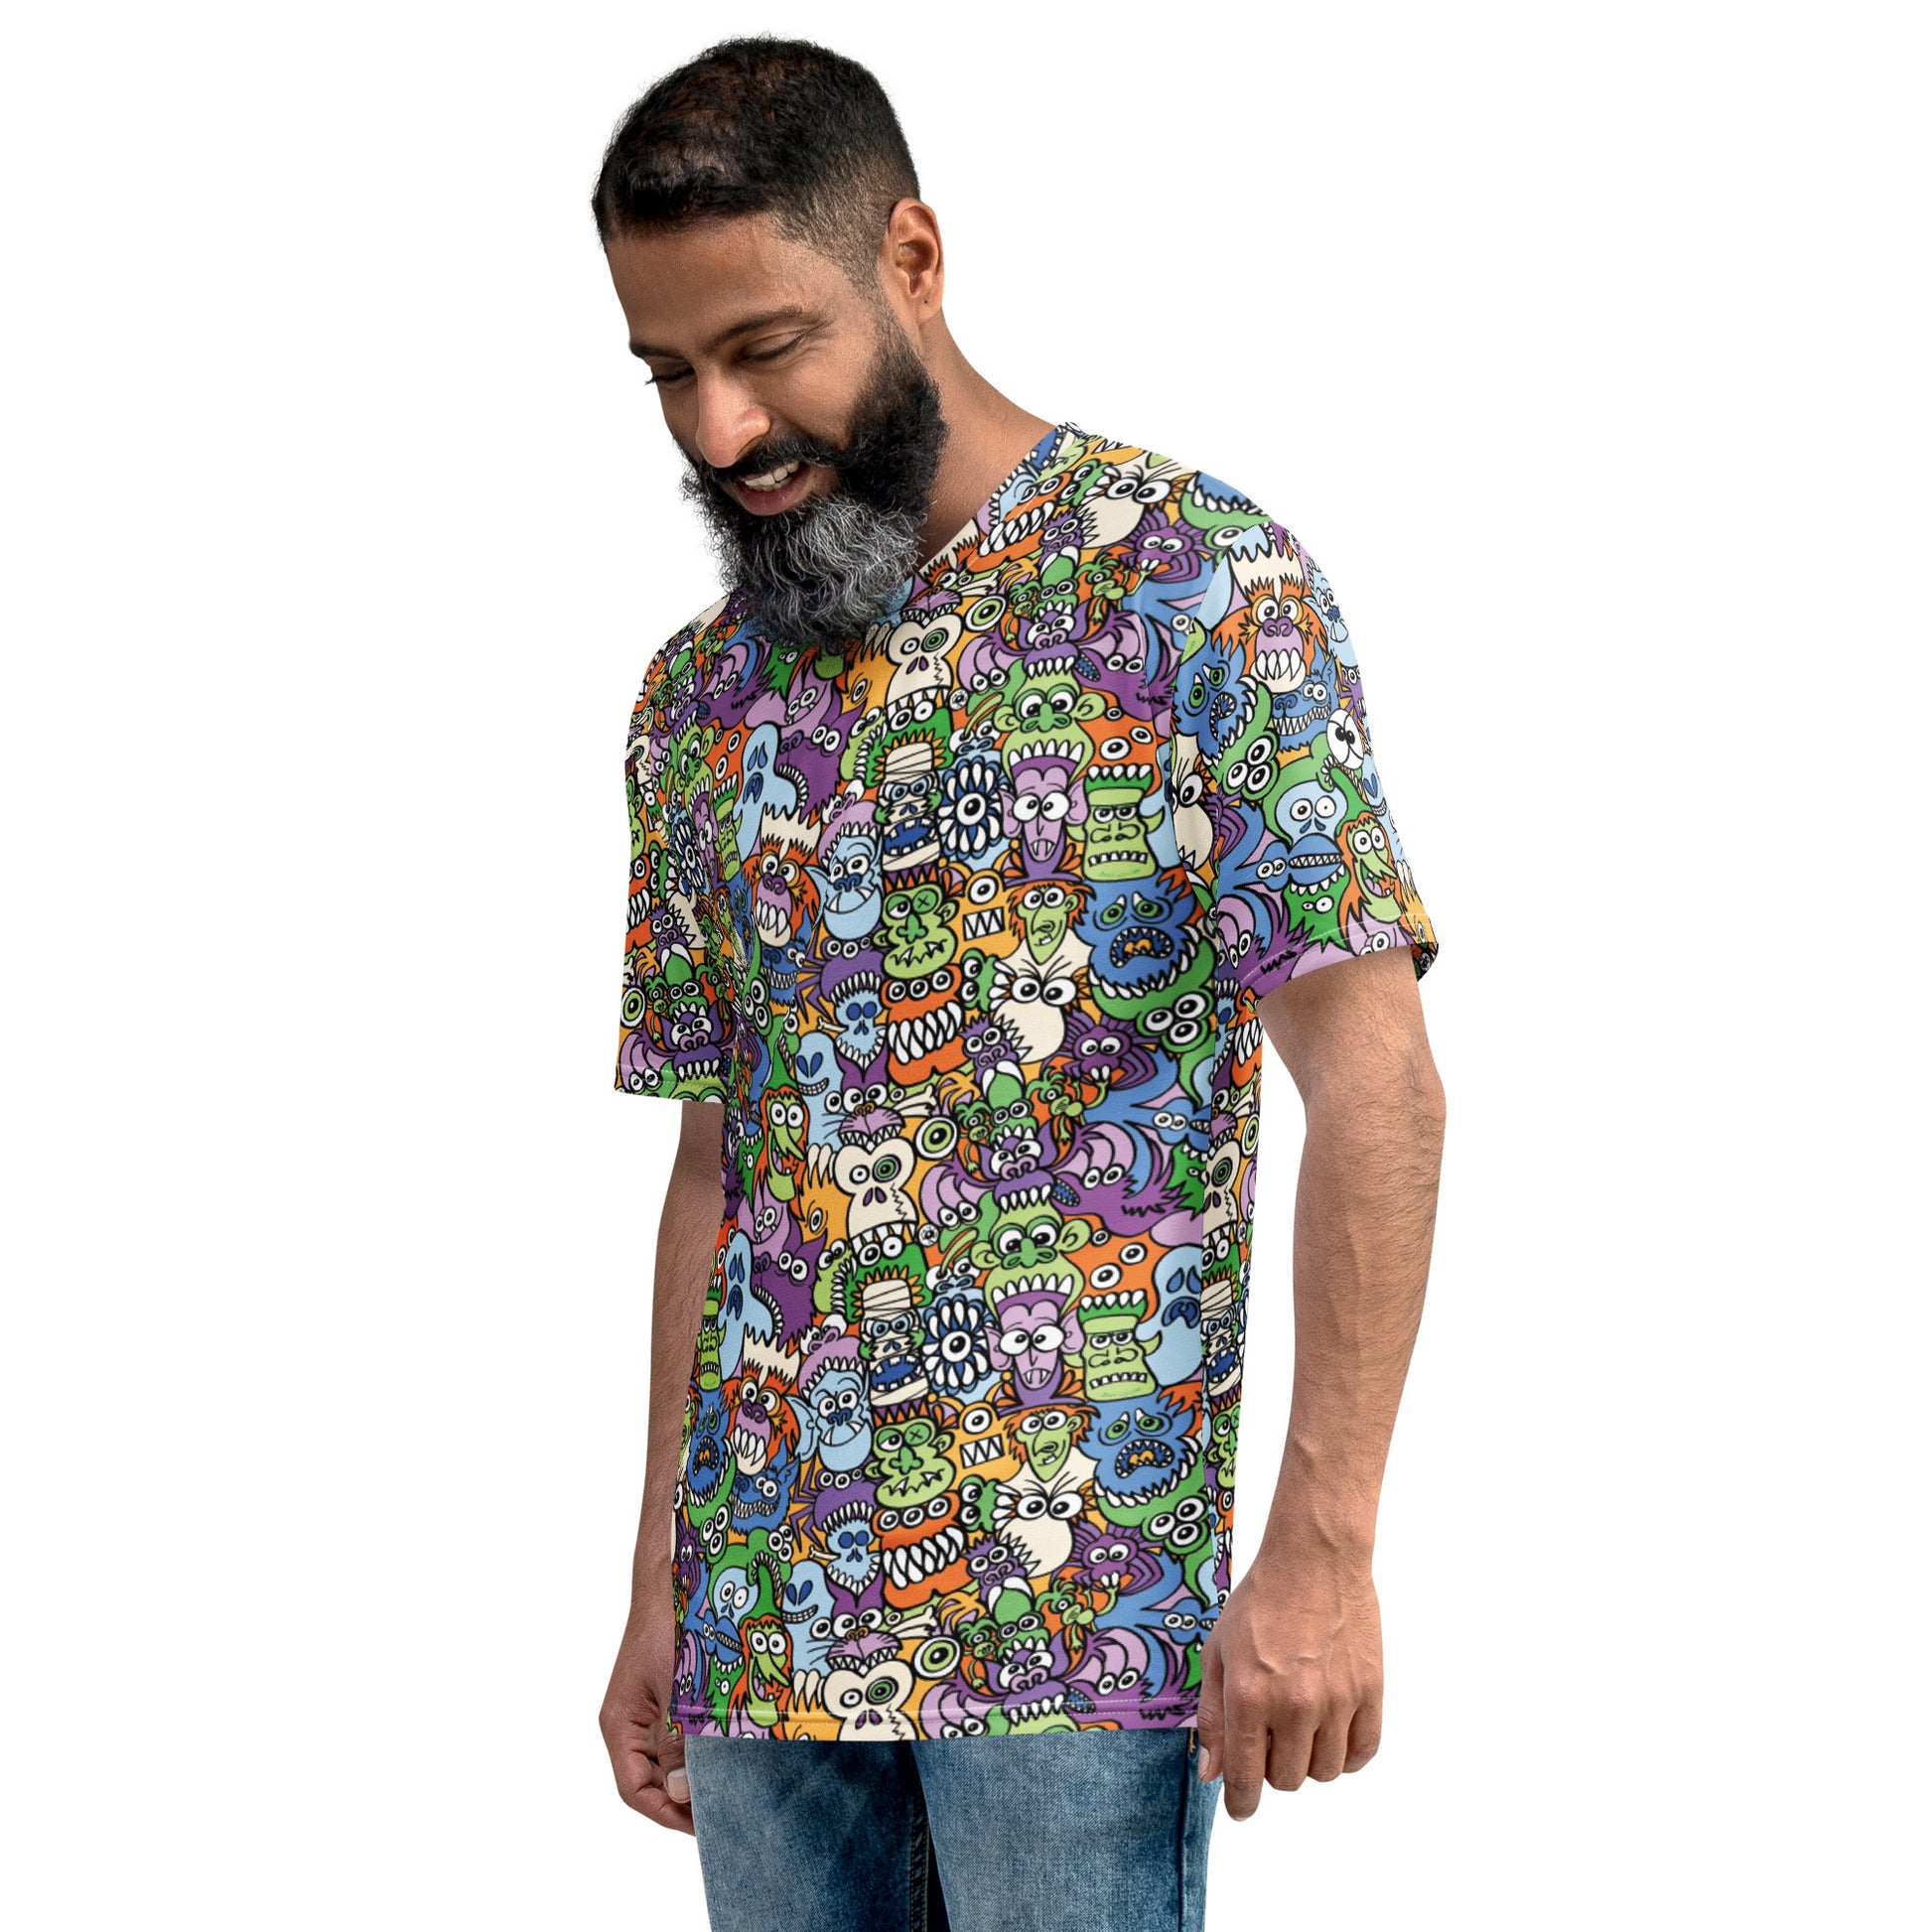 All the spooky Halloween monsters in a pattern design Men's t-shirt. Side view